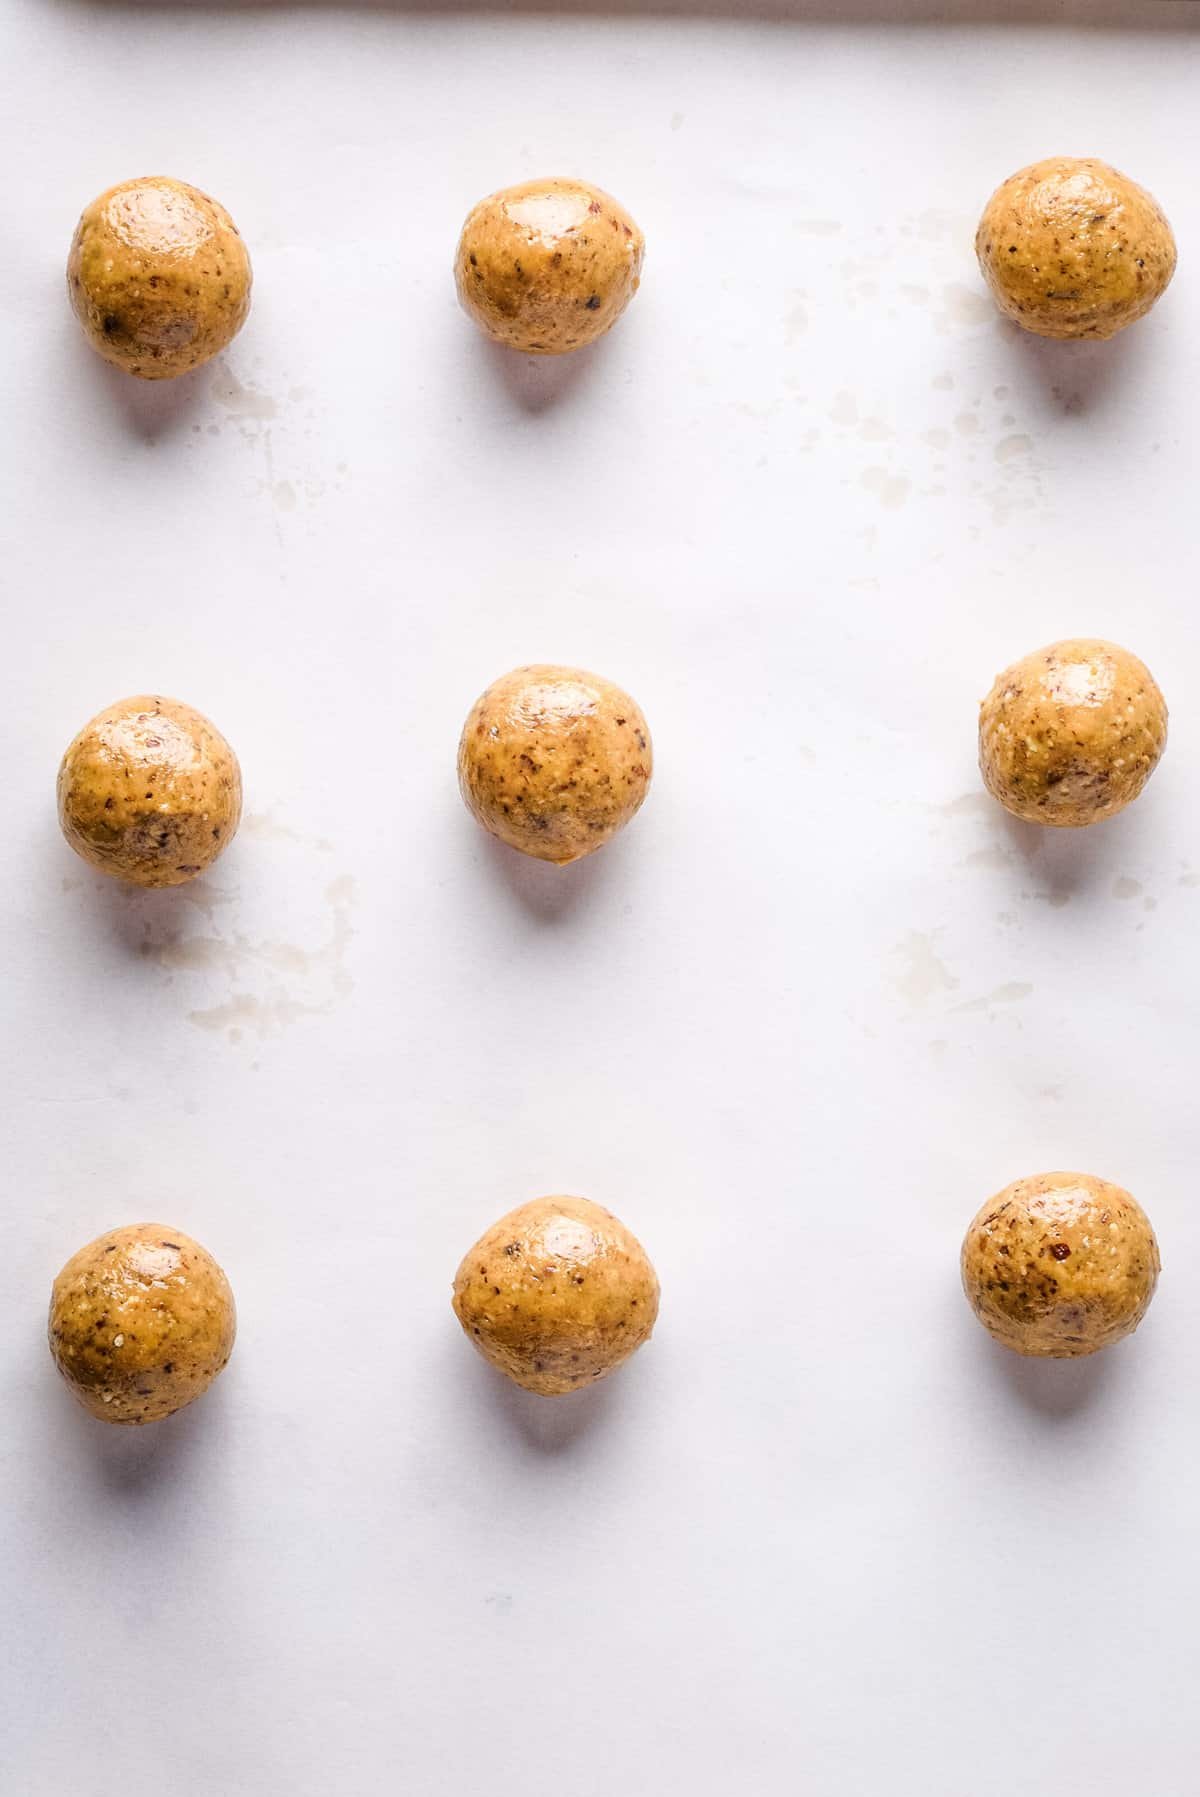 Overhead view of cookie dough balls on baking sheet lined with parchment paper.